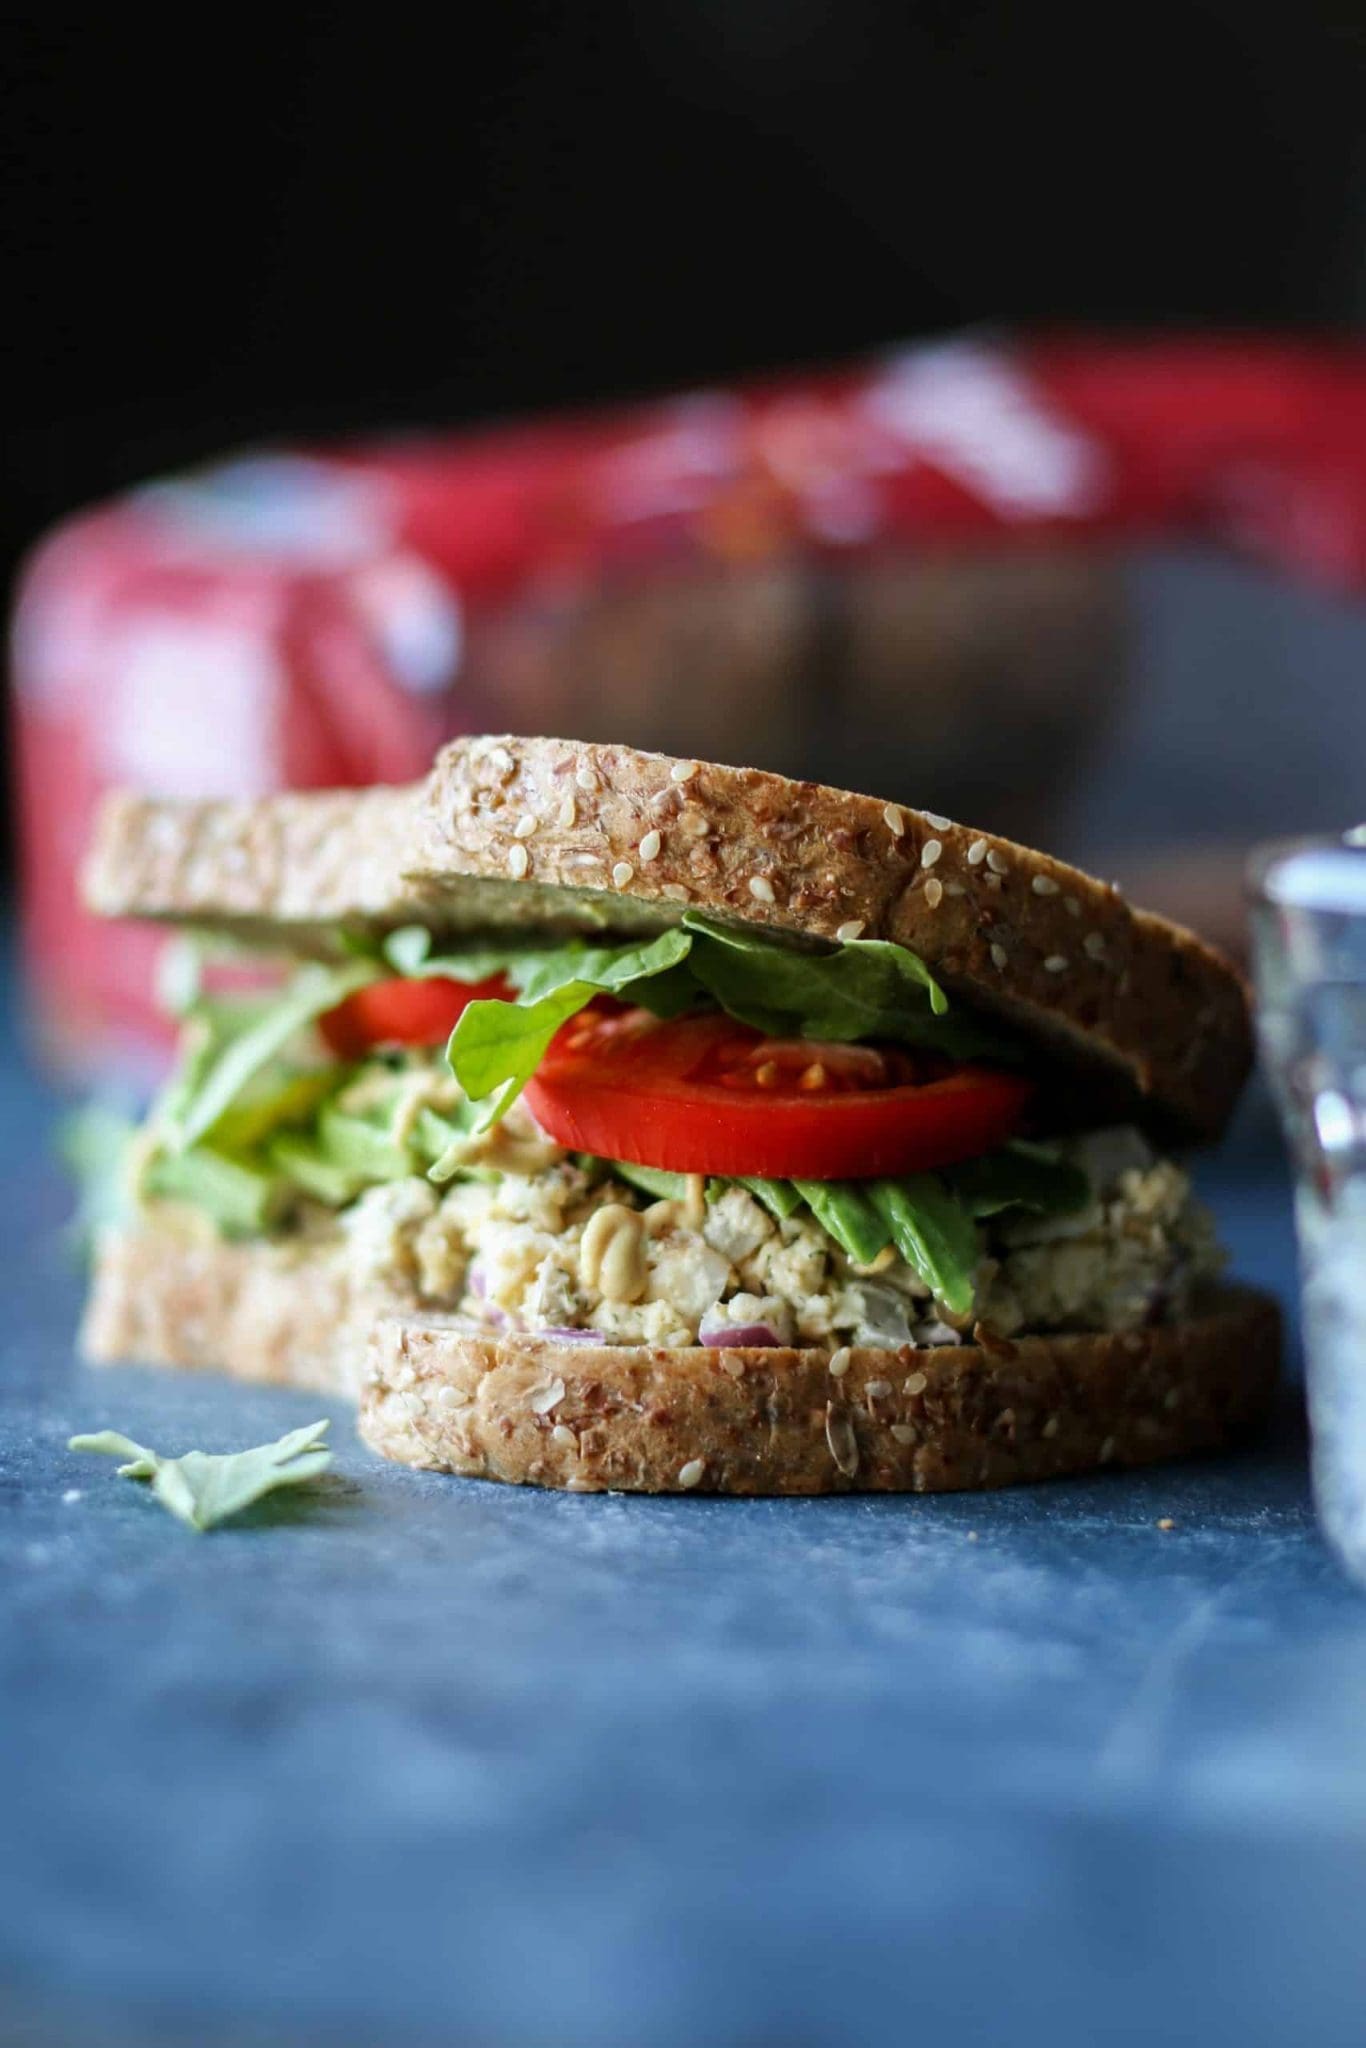 chickpea salad sandwich seen from the side